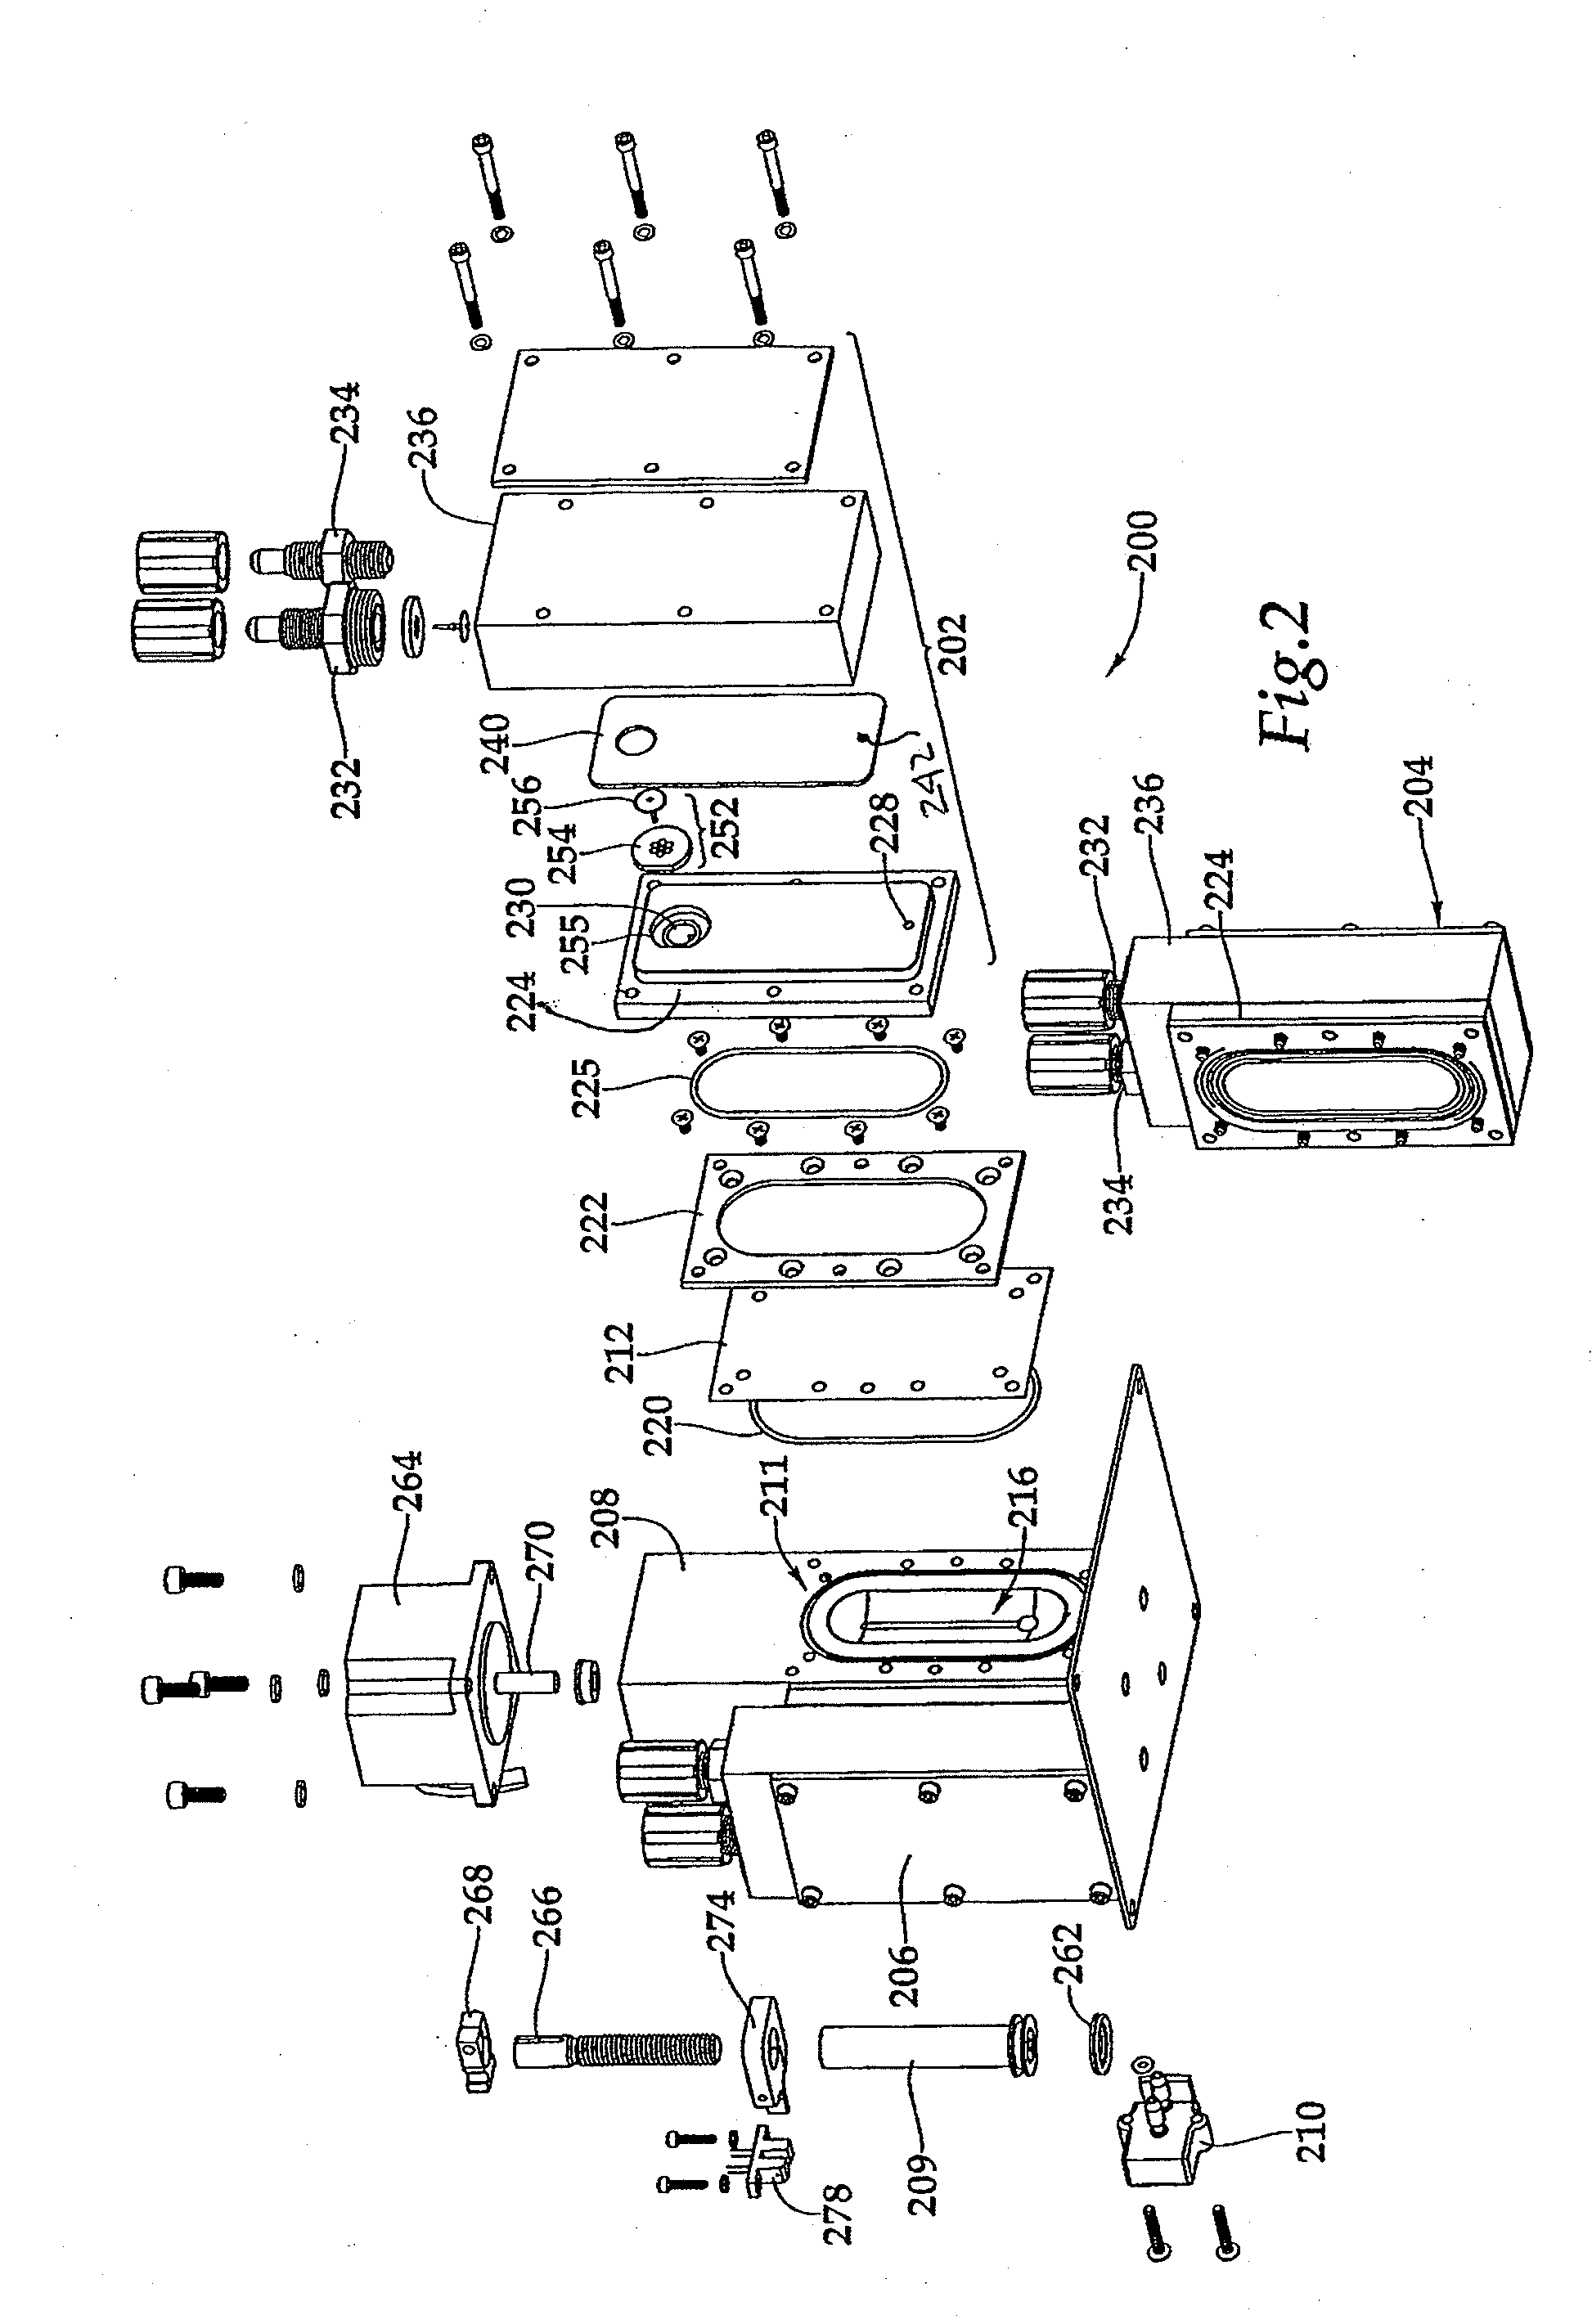 Precision pump with multiple heads